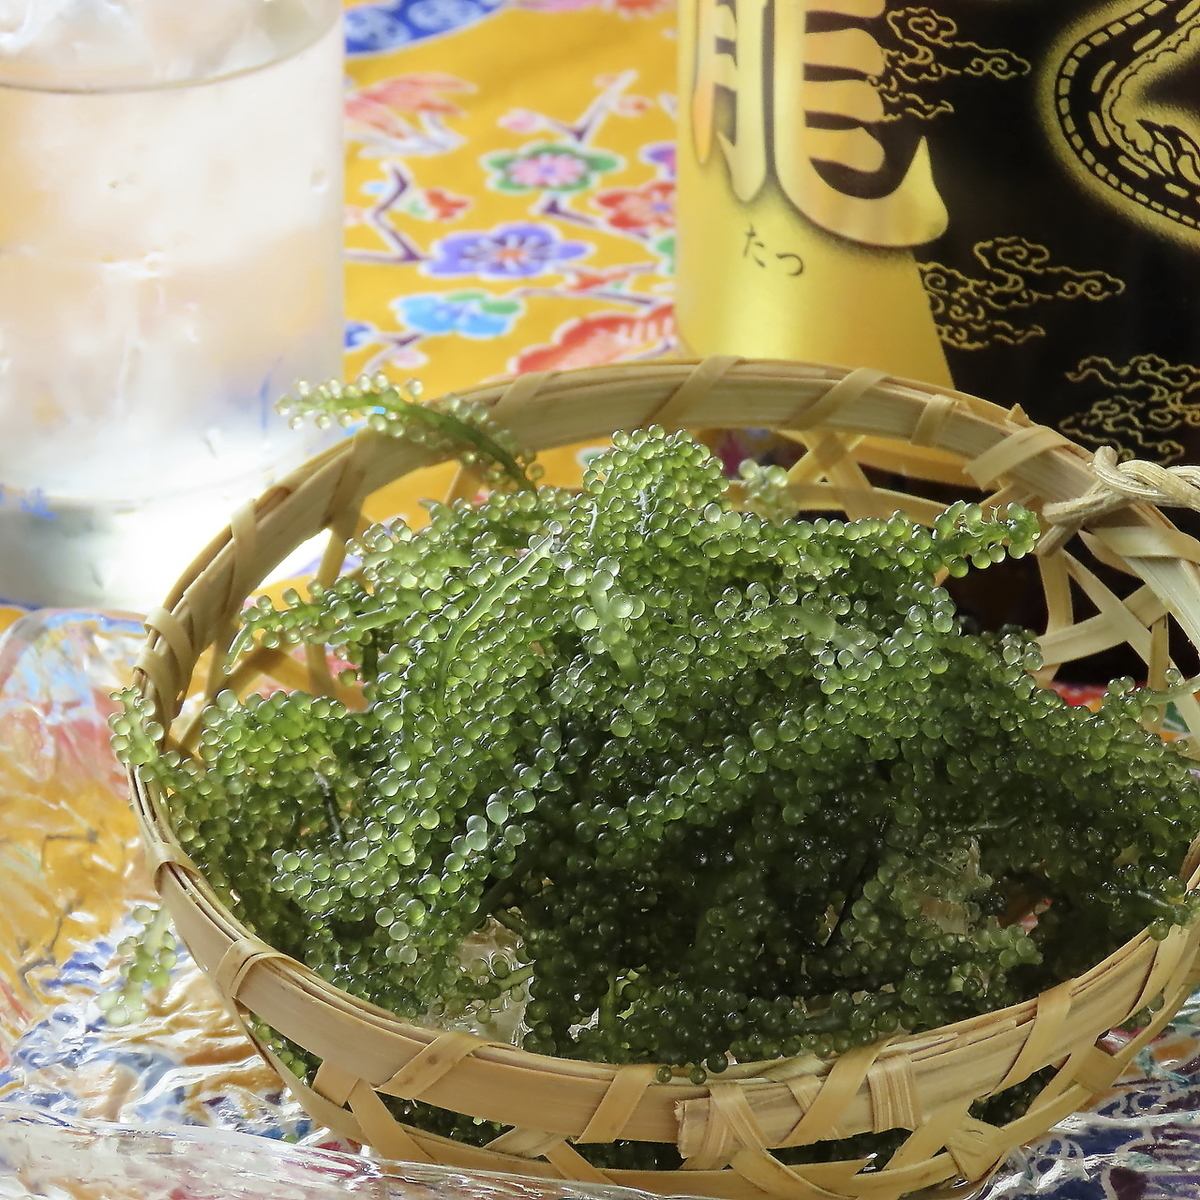 Lots of delicious dishes made with Okinawan ingredients!